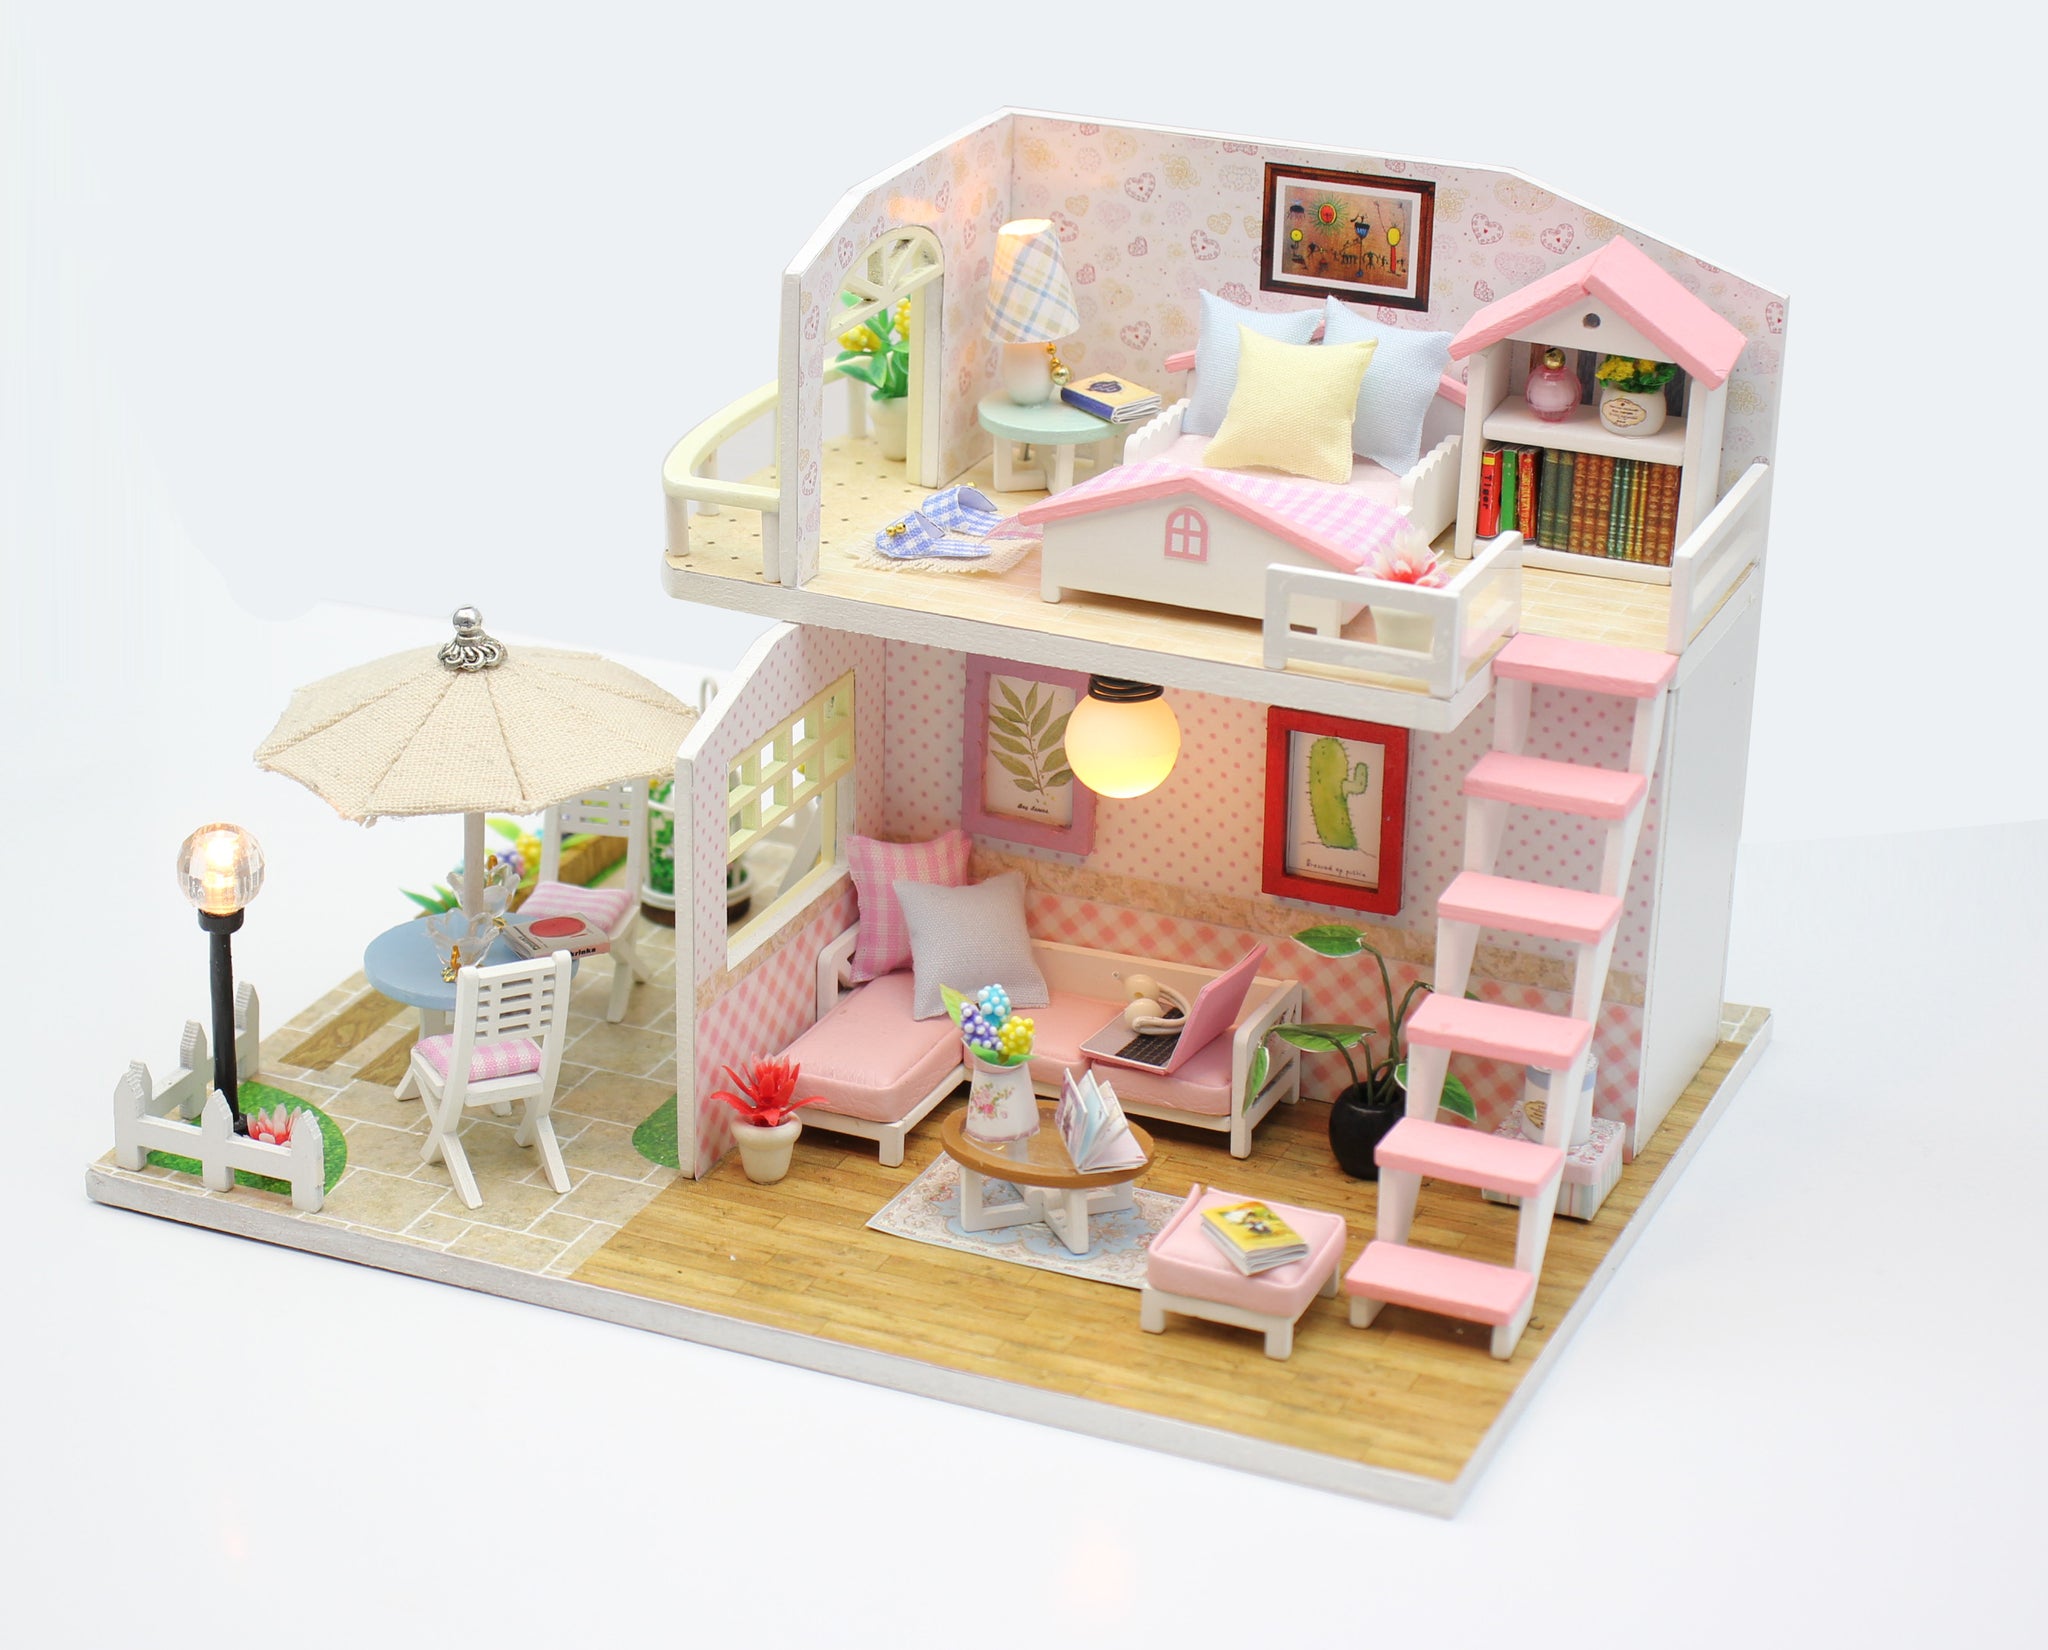 Miniature Doll House Diy Wooden Dollhouse with Furniture & Led